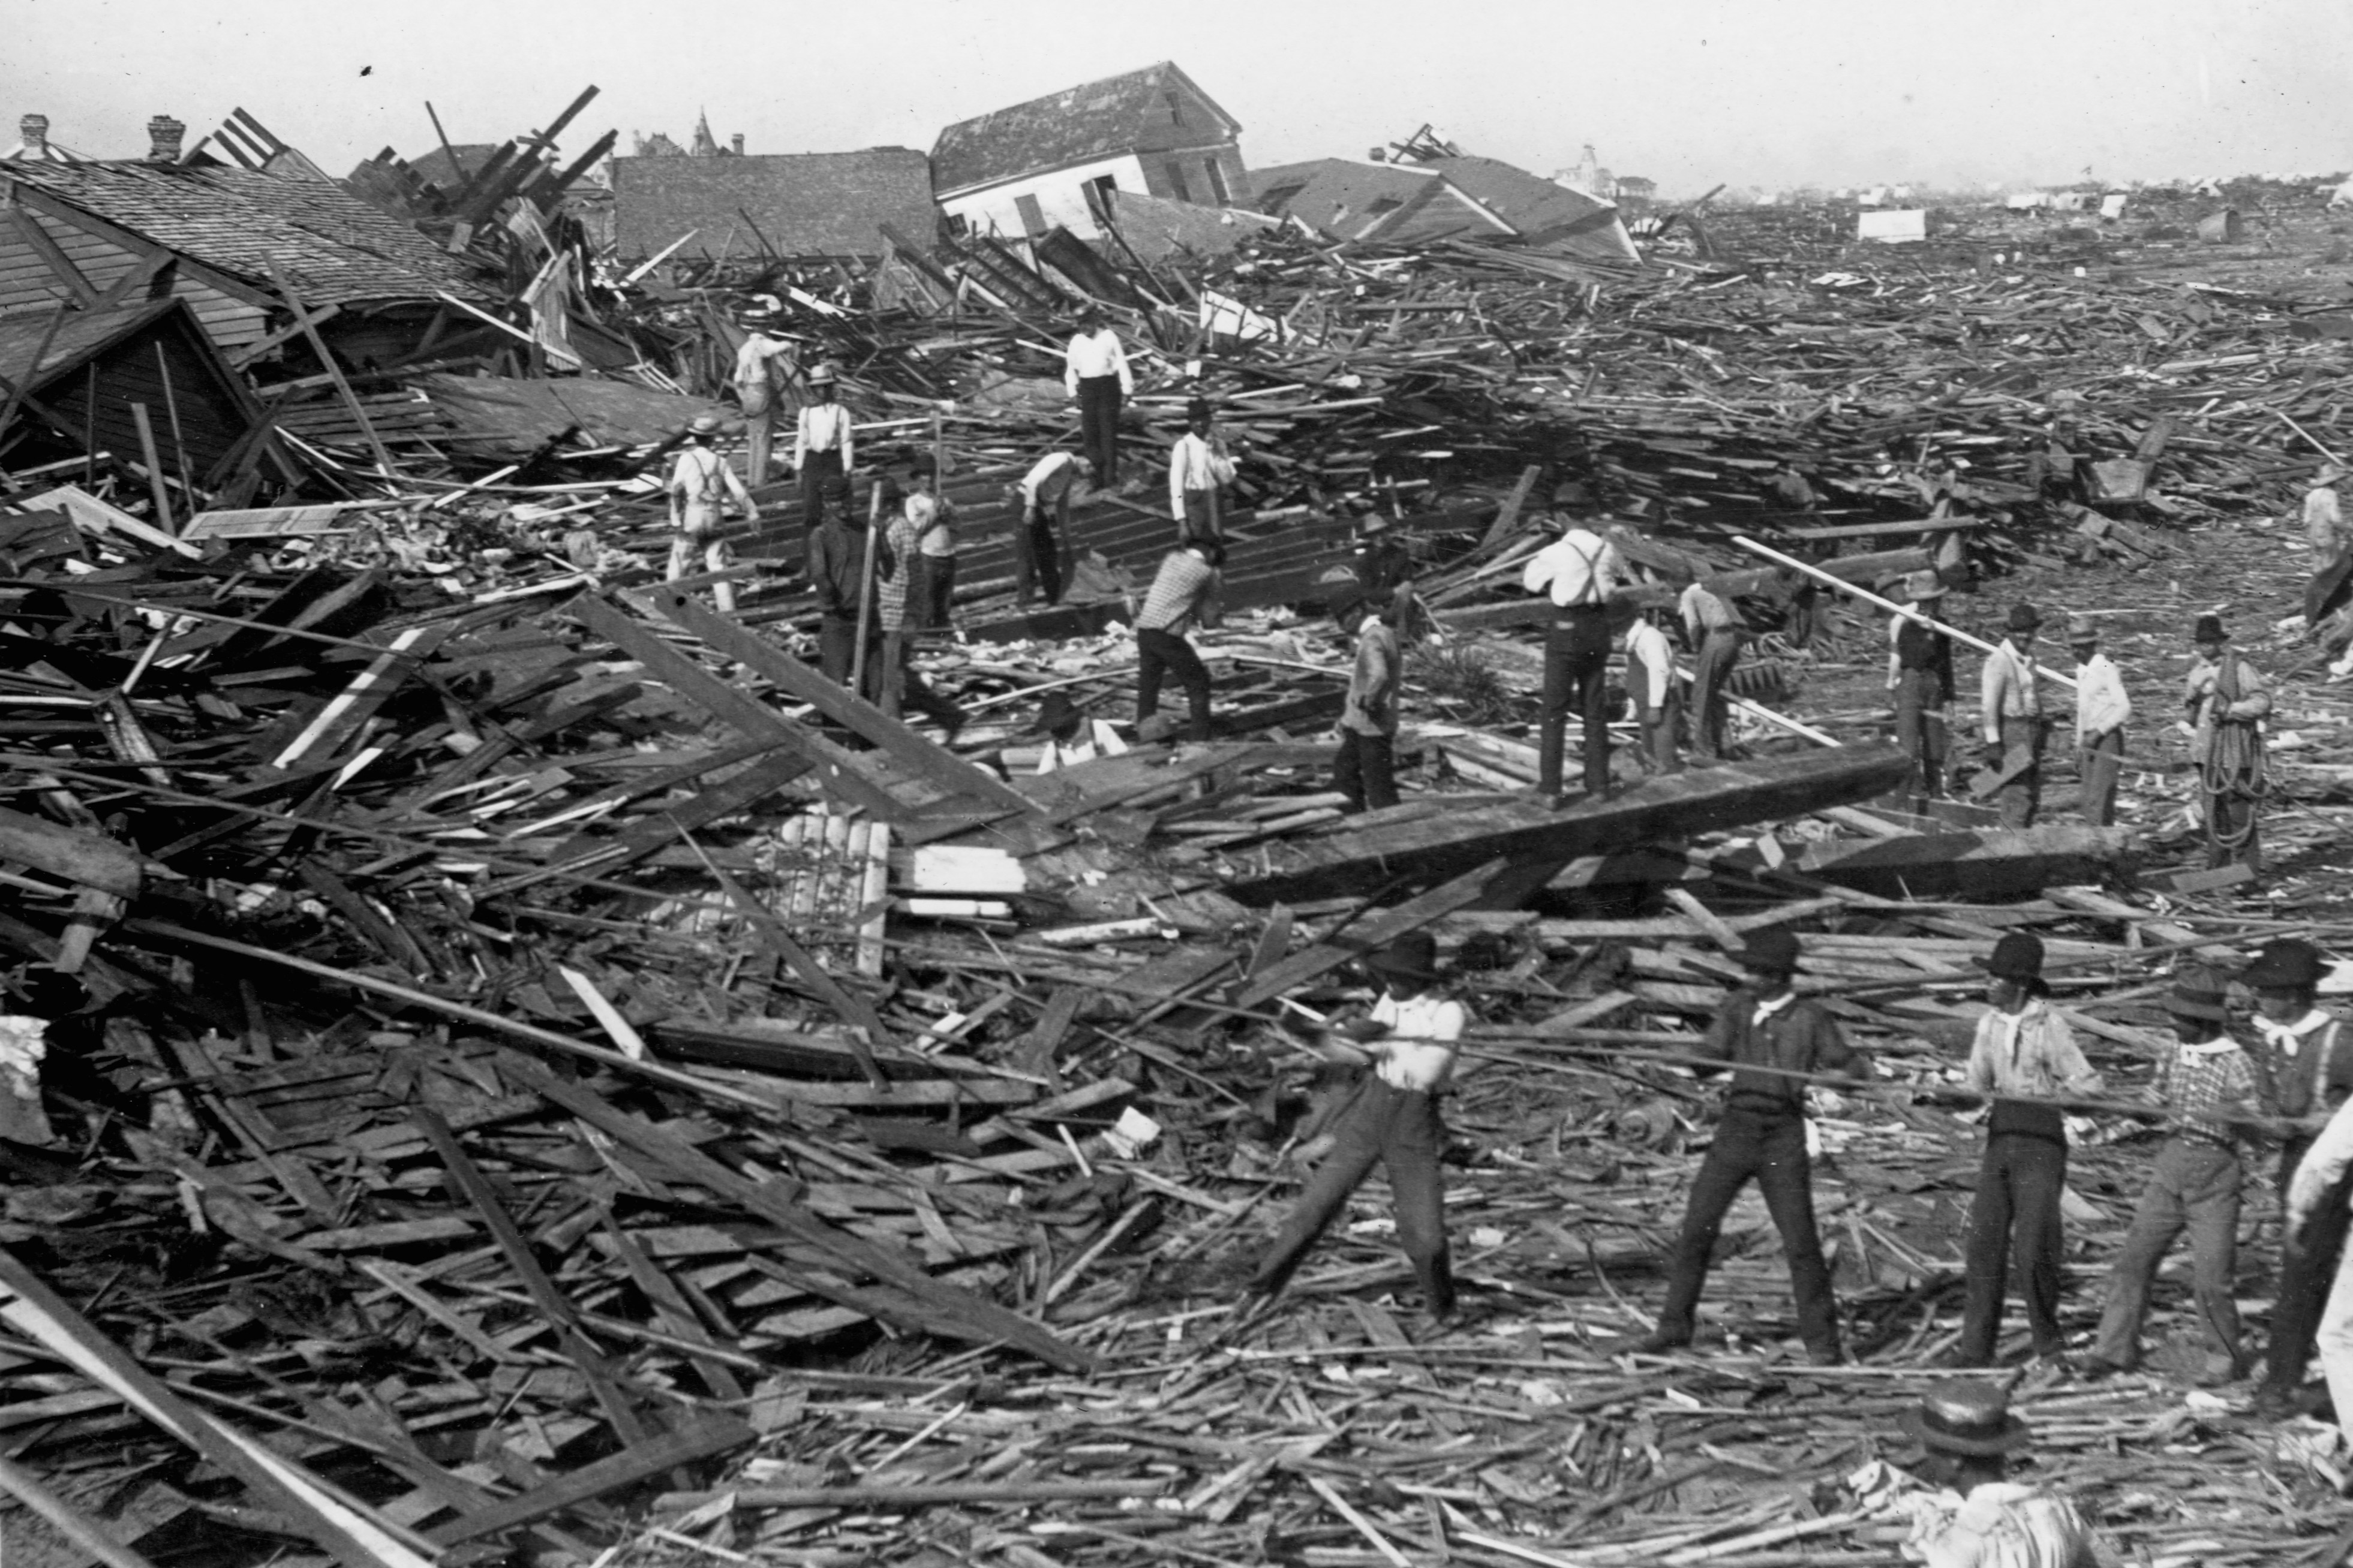 Men use ropes to pull away the debris of houses in order to look for bodies, after the Galveston Hurricane of 1900. (Library of Congress/Corbis/VCG—Getty Images)